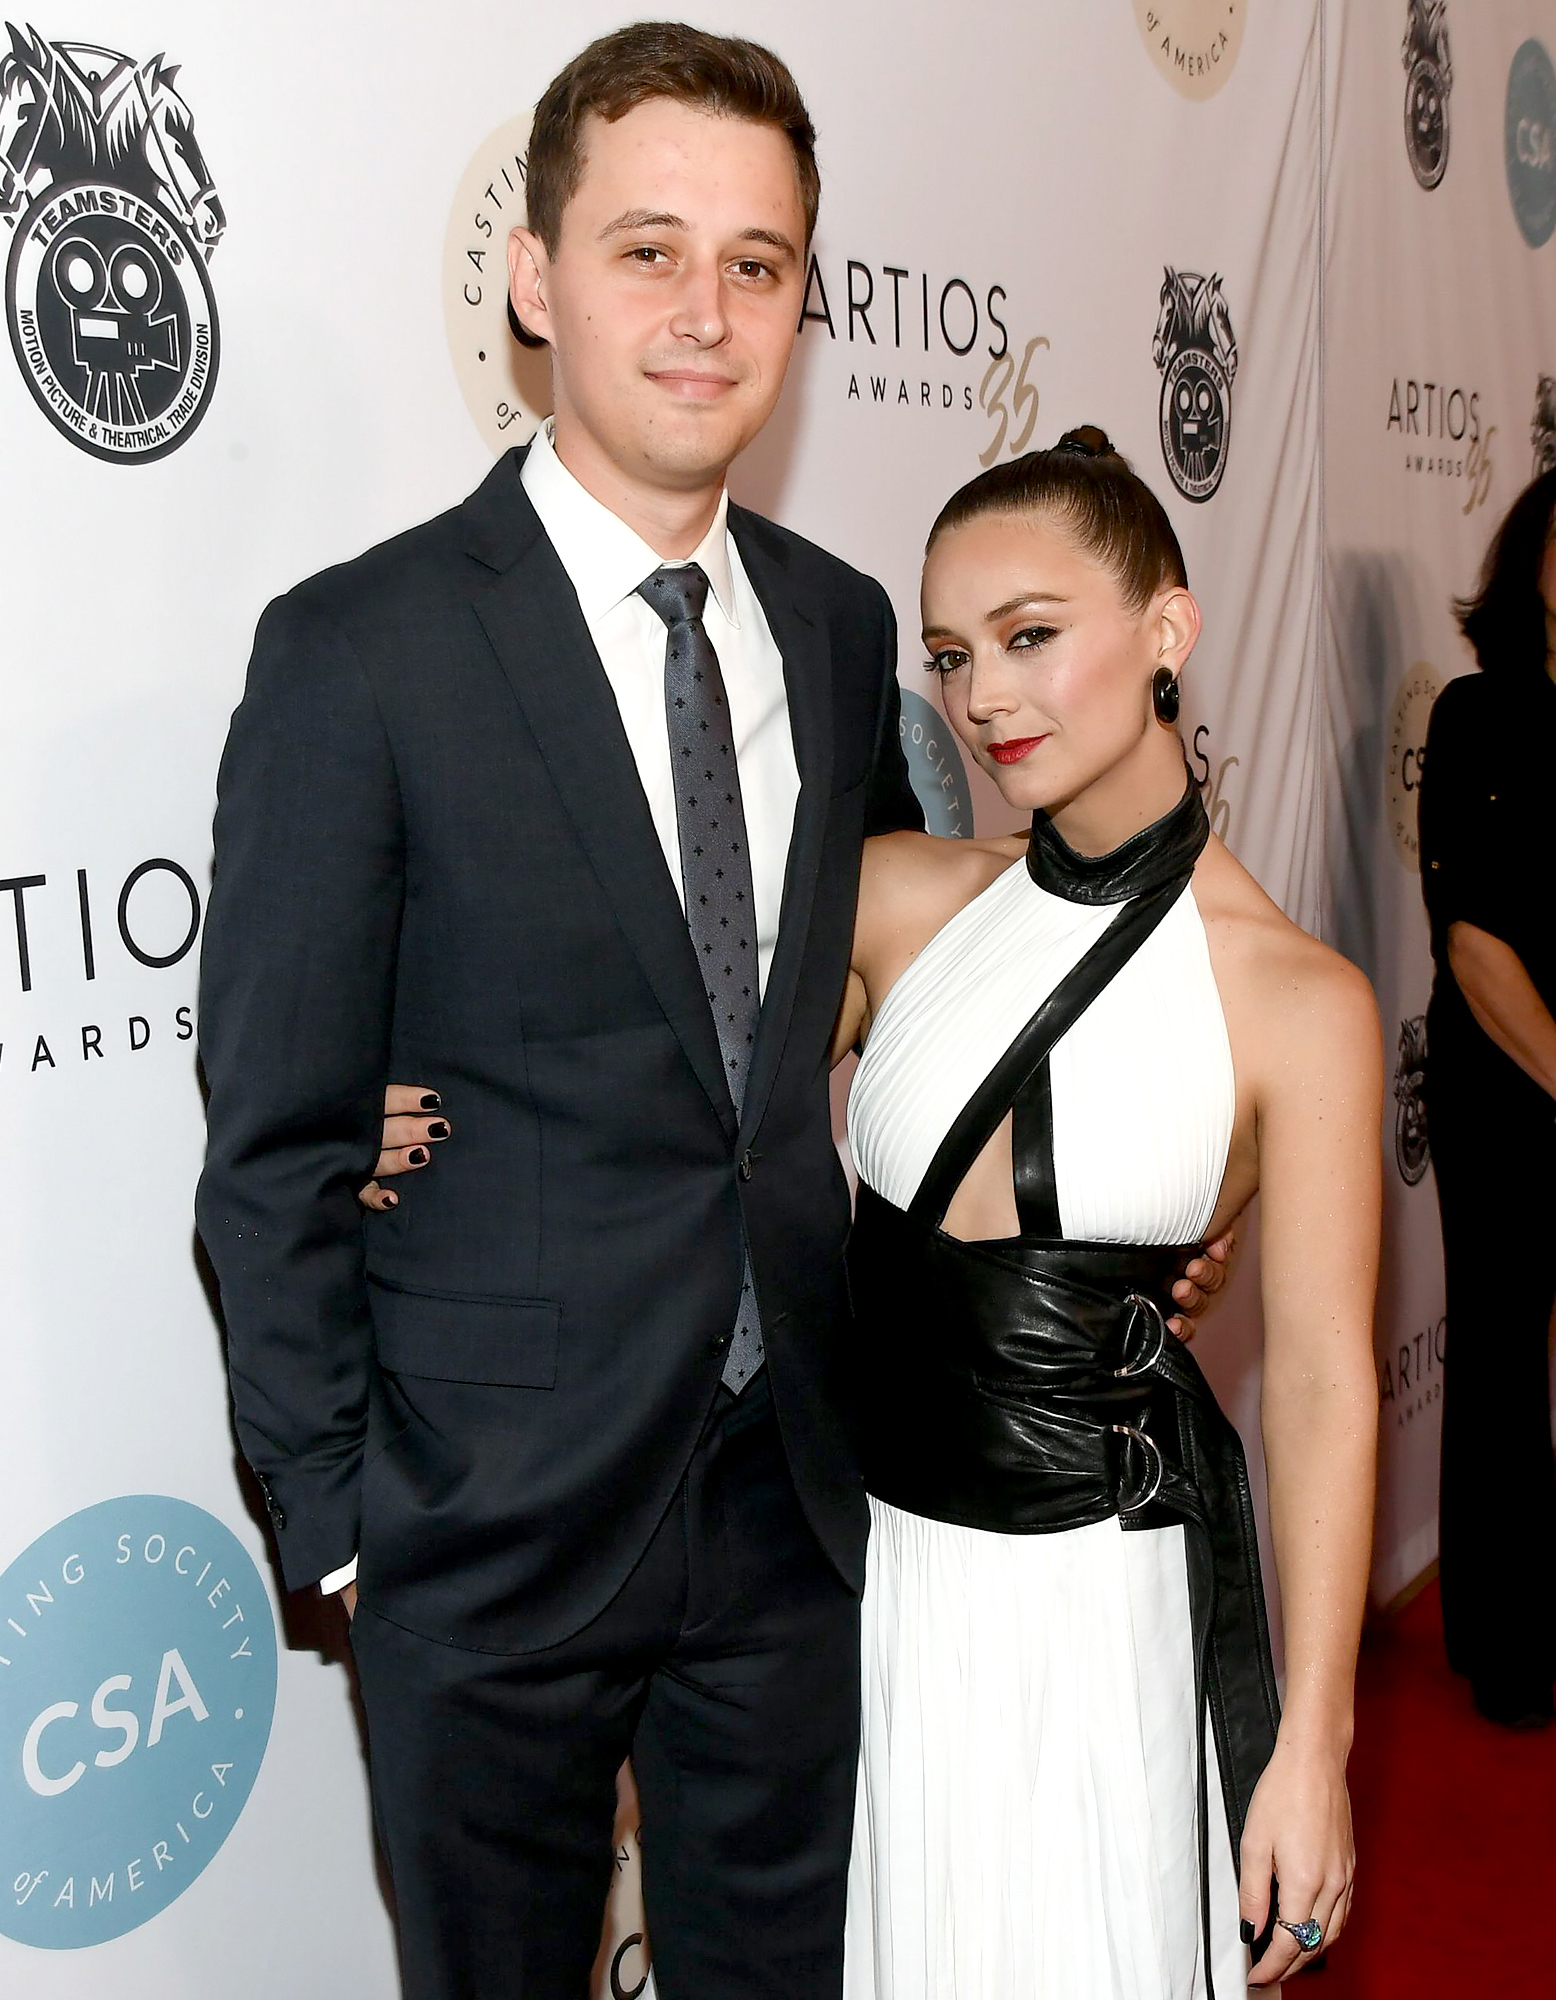 Billie Lourd Engaged to Austen Rydell After 4 Years of Dating